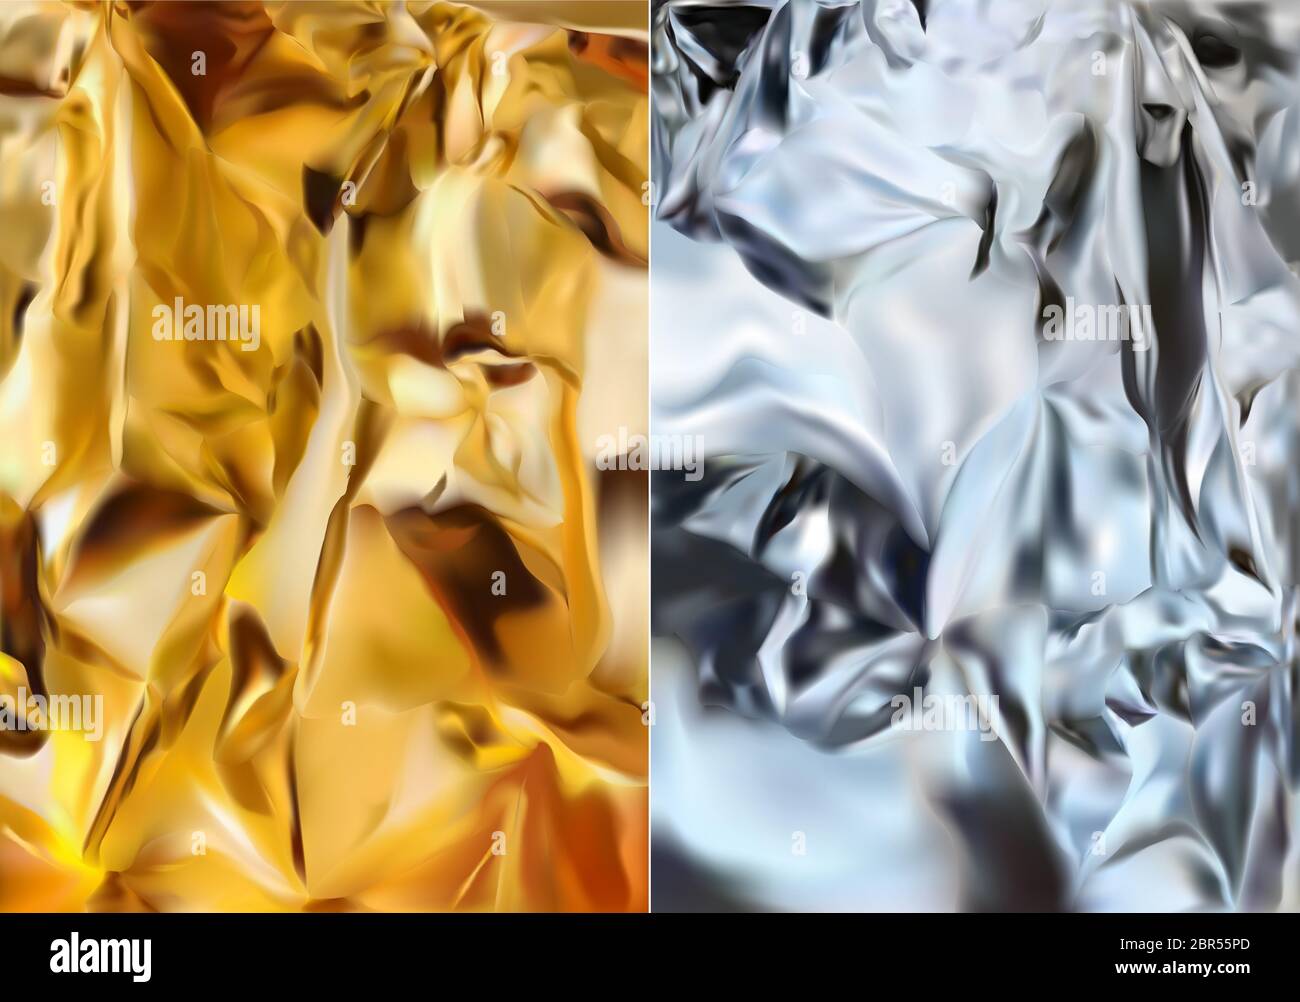 https://c8.alamy.com/comp/2BR55PD/silver-foil-and-gold-foil-shine-silver-and-gold-texture-3d-realistic-foil-vector-illustration-2BR55PD.jpg